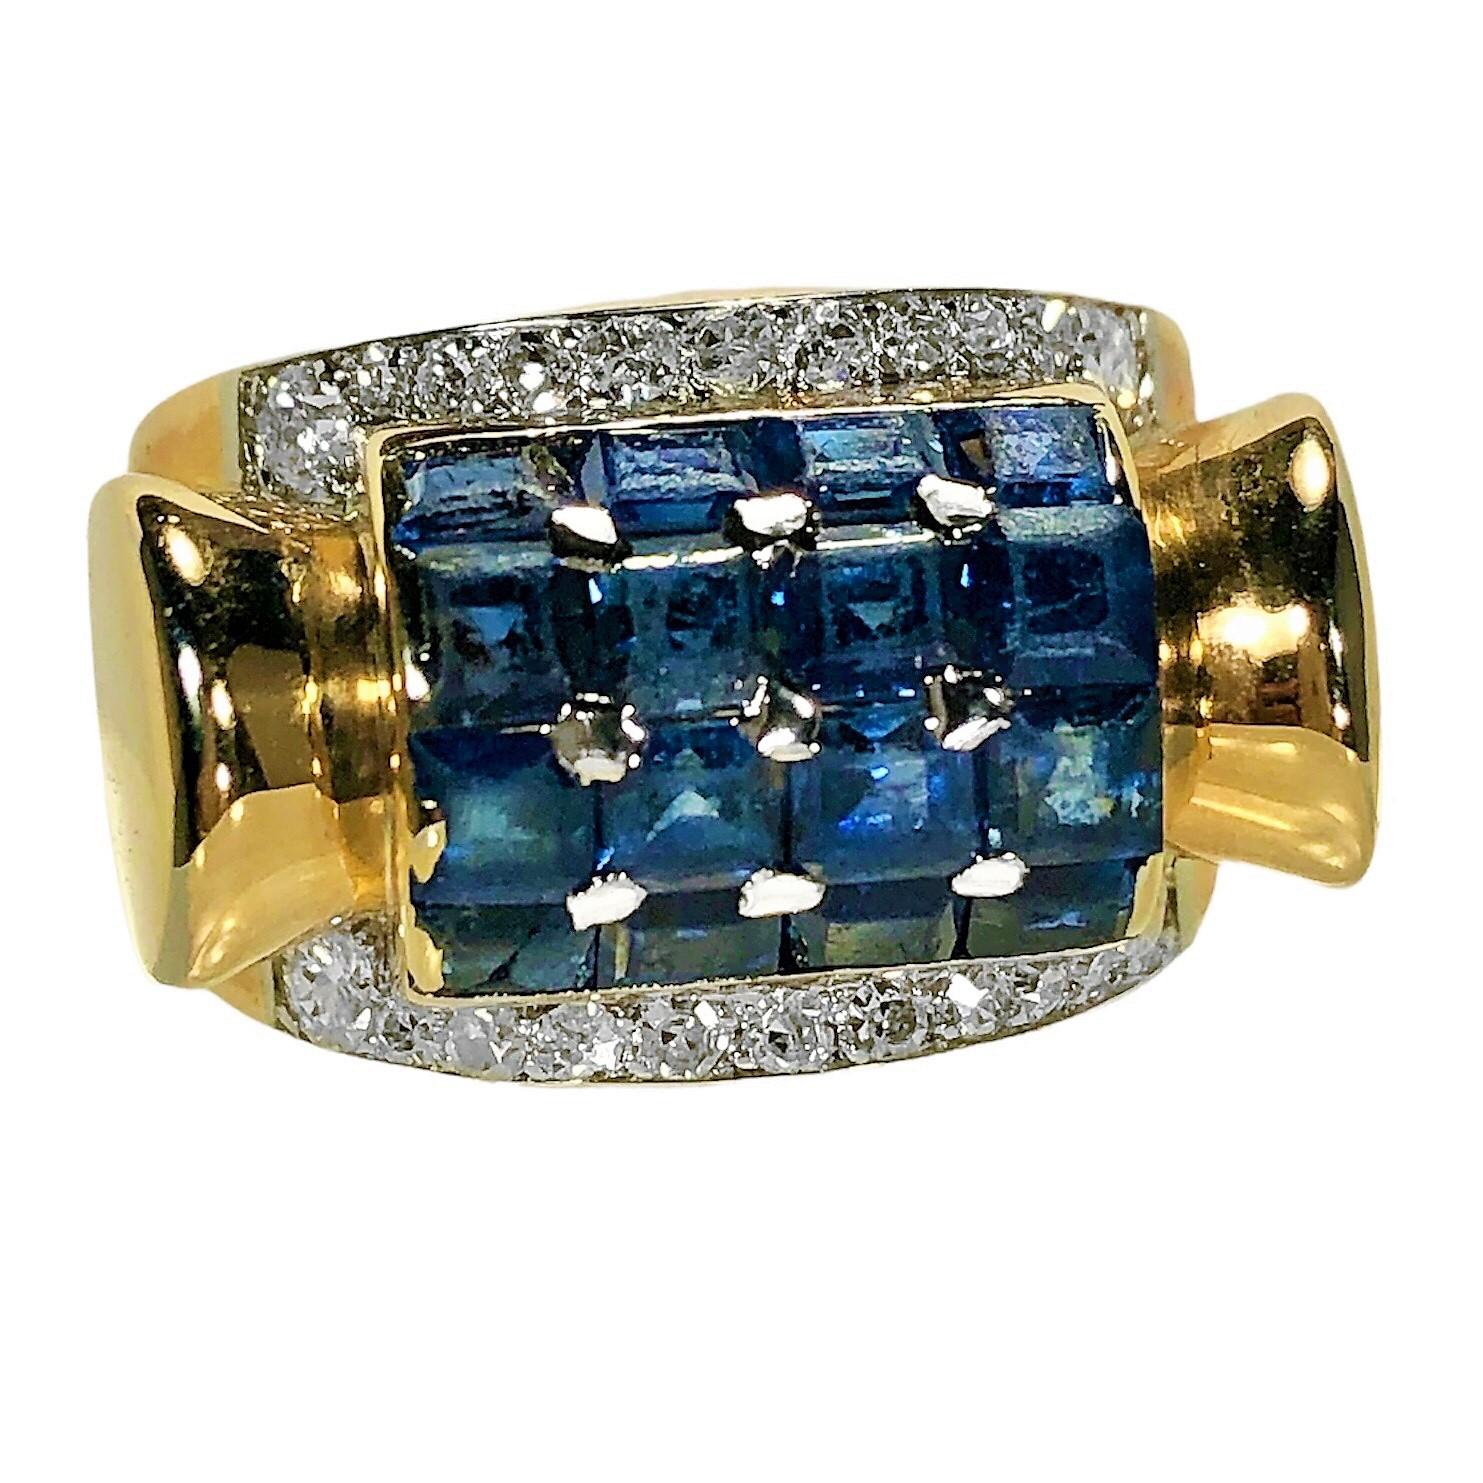 This Retro period 14k pink gold ring is characteristic of the look and feel of items made during the 1940's through 1950's. A dome of sixteen natural blue square cut sapphires with a total approximate weight of 2.00ct is flanked by two rows of